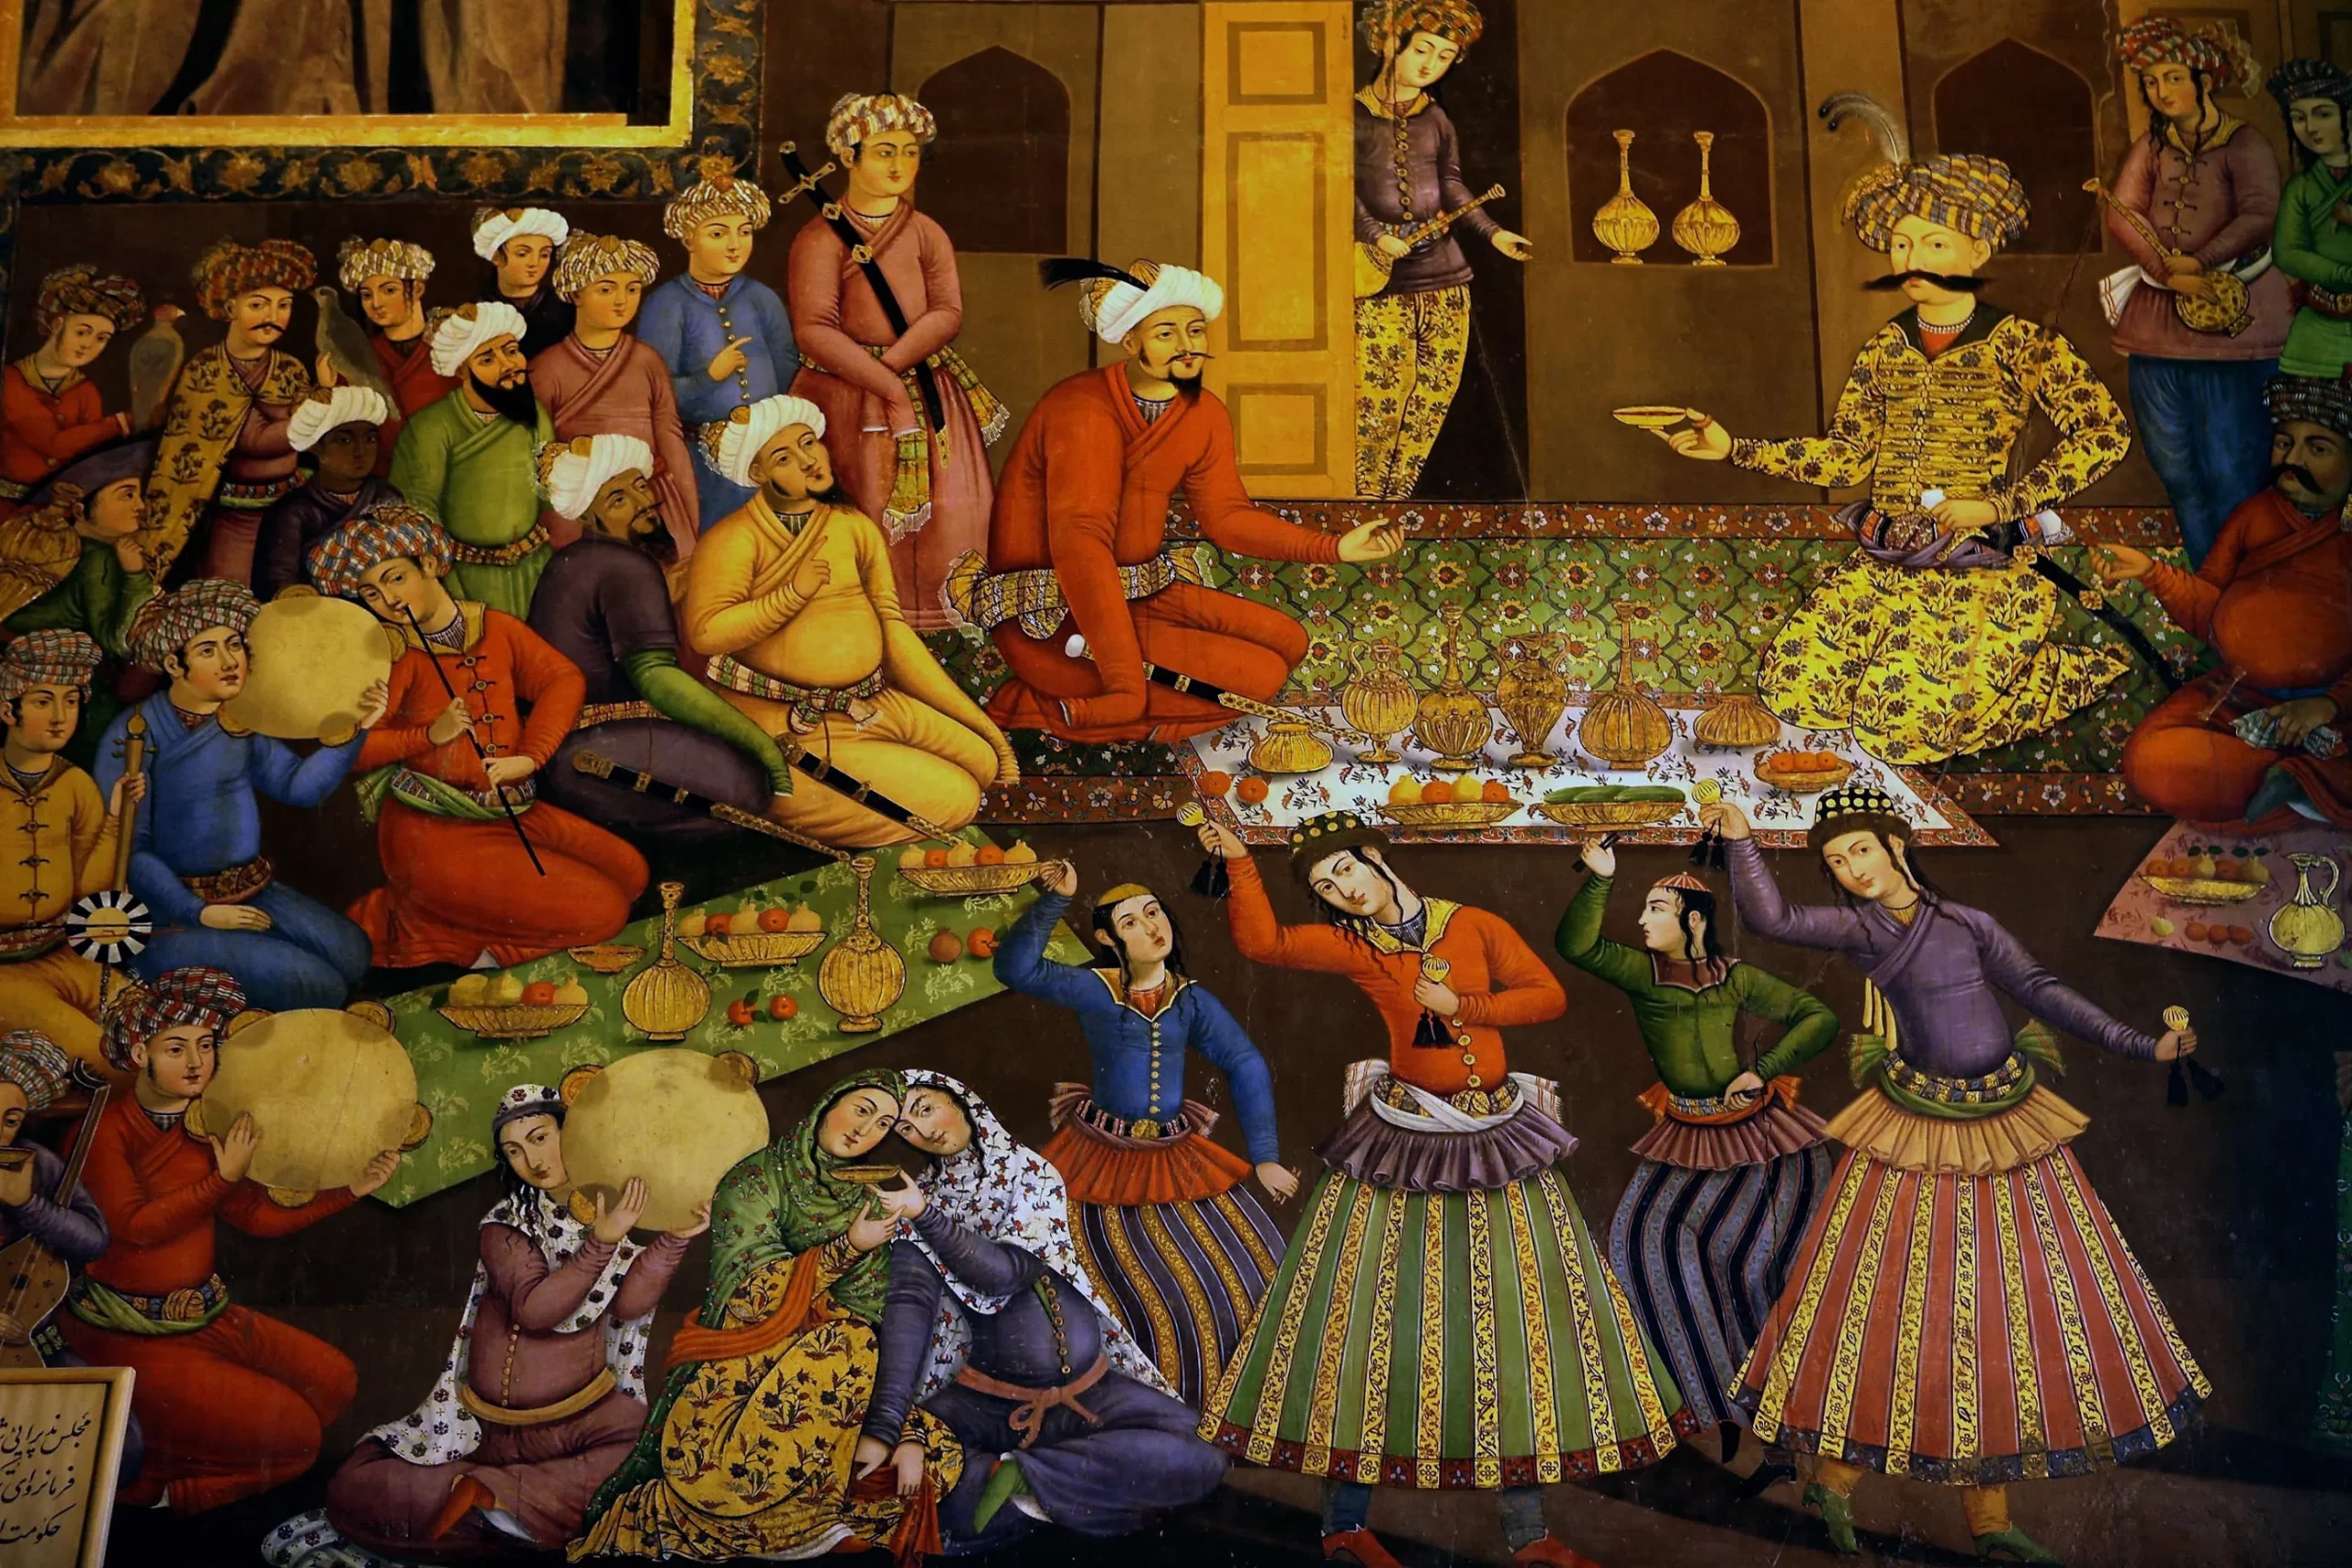 Shah Abbas and the court